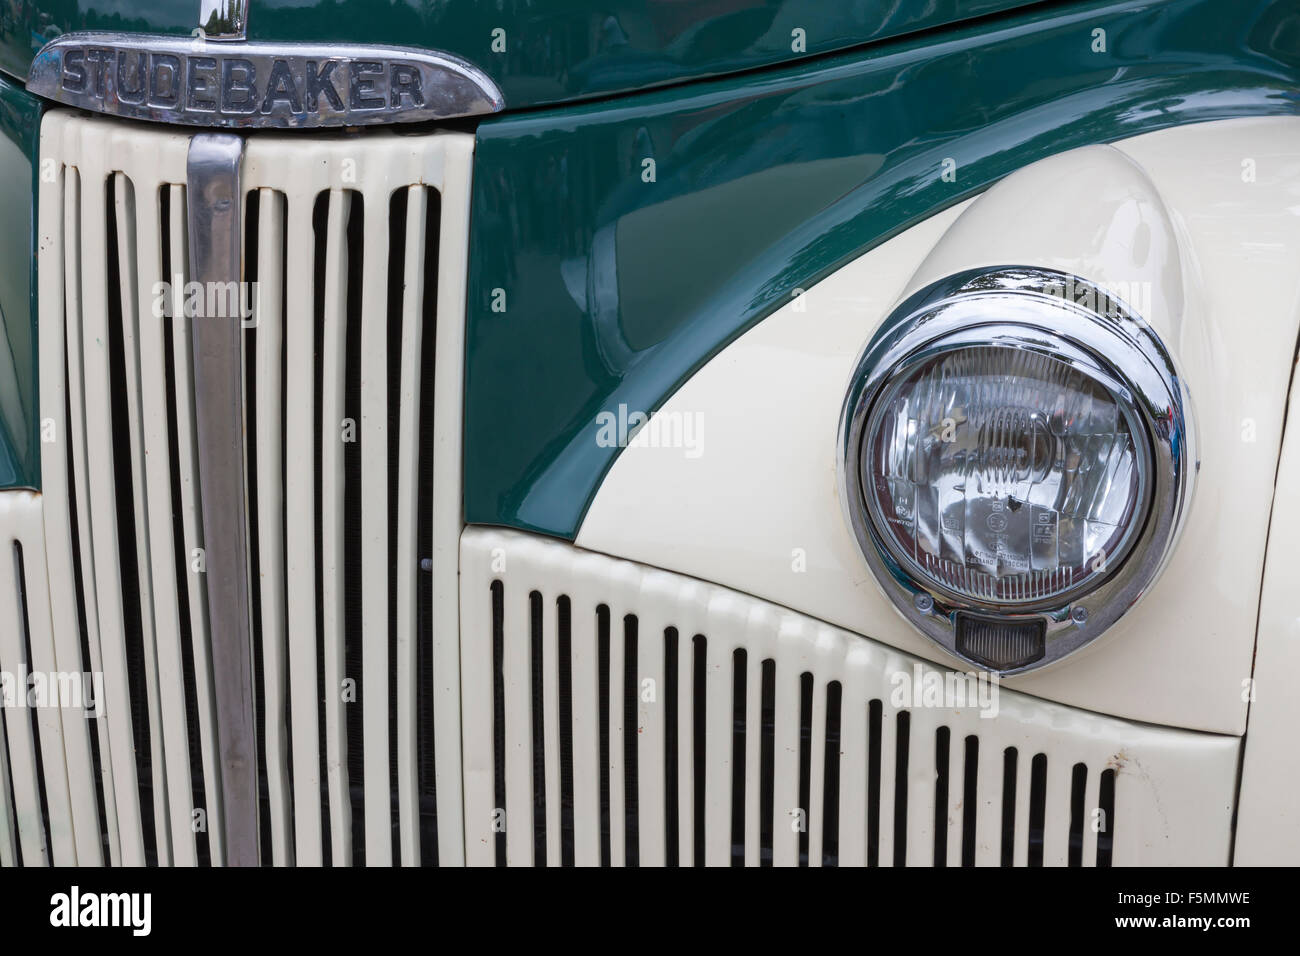 American vintage car, close-up of Studebaker front detail Stock Photo